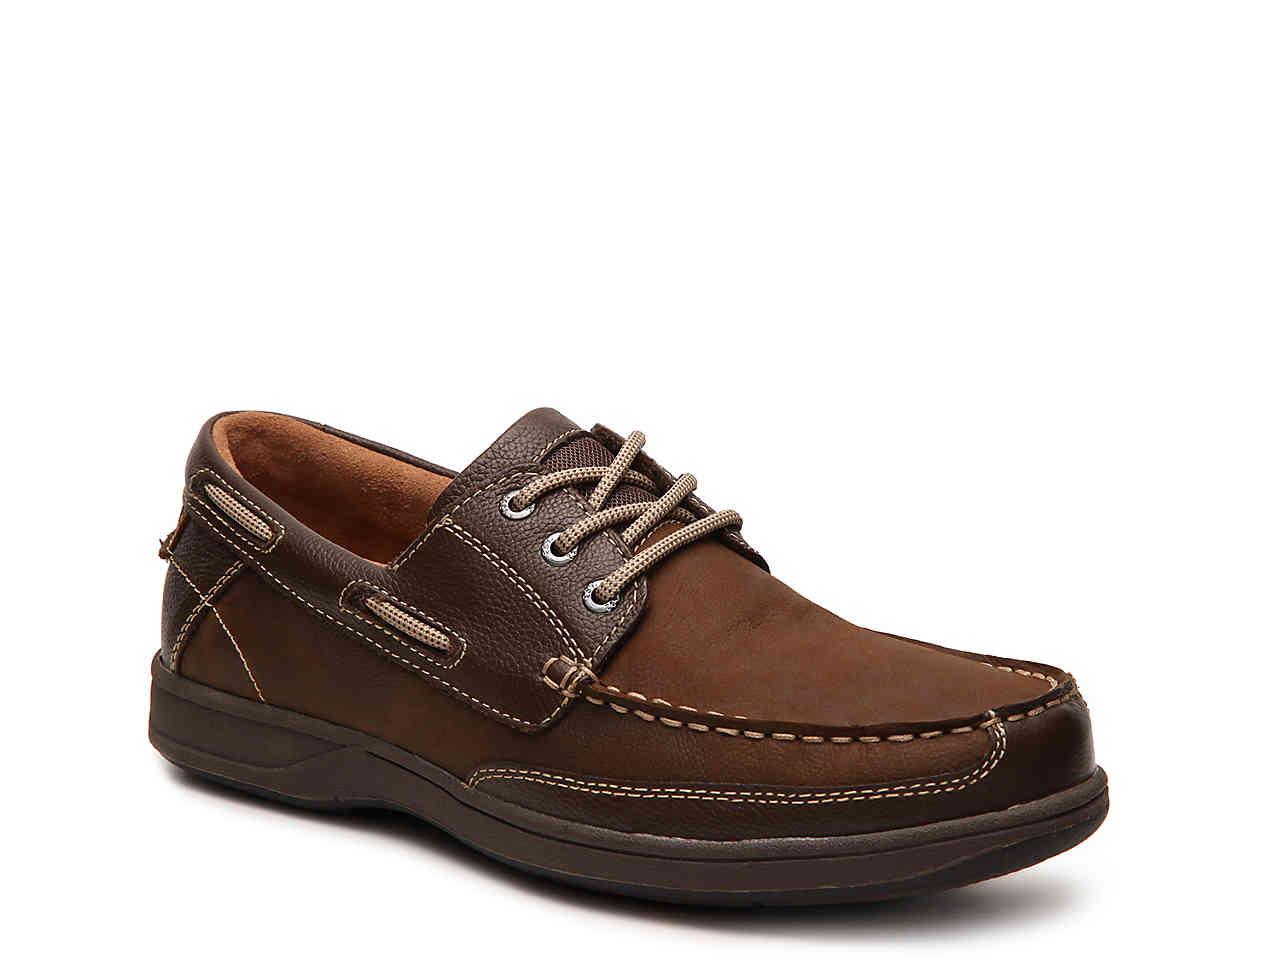 Florsheim Leather Lakeside Boat Shoe in Brown for Men - Lyst